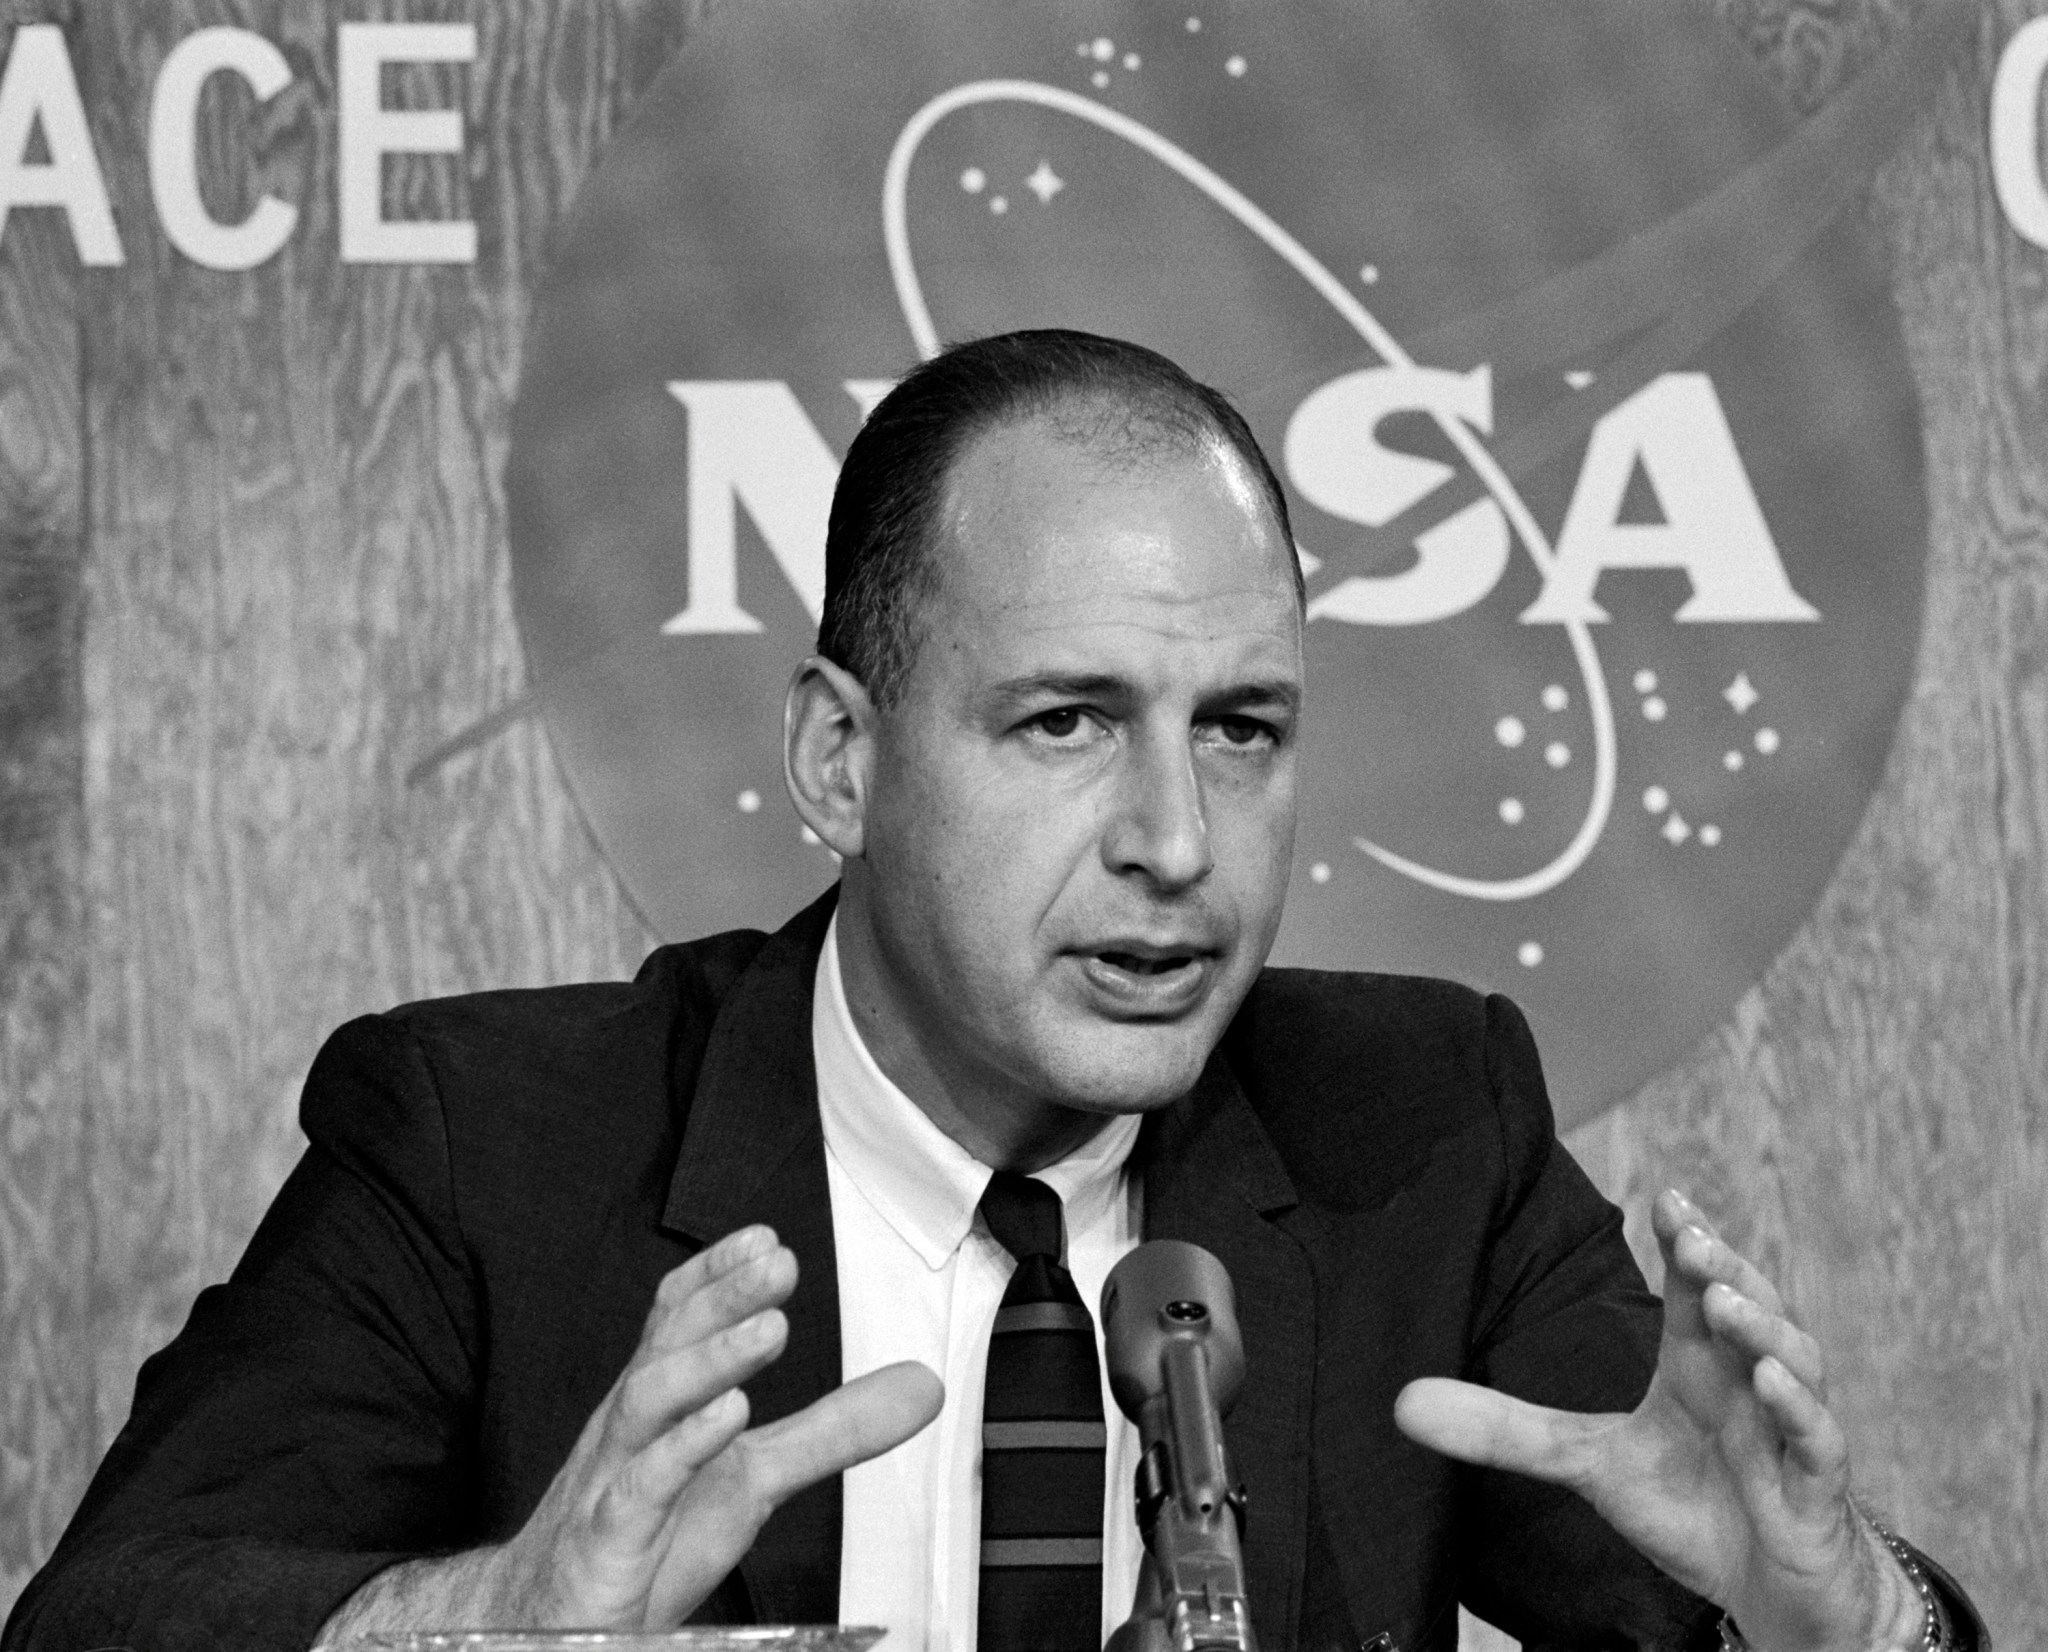 Man seated in front of NASA insignia.